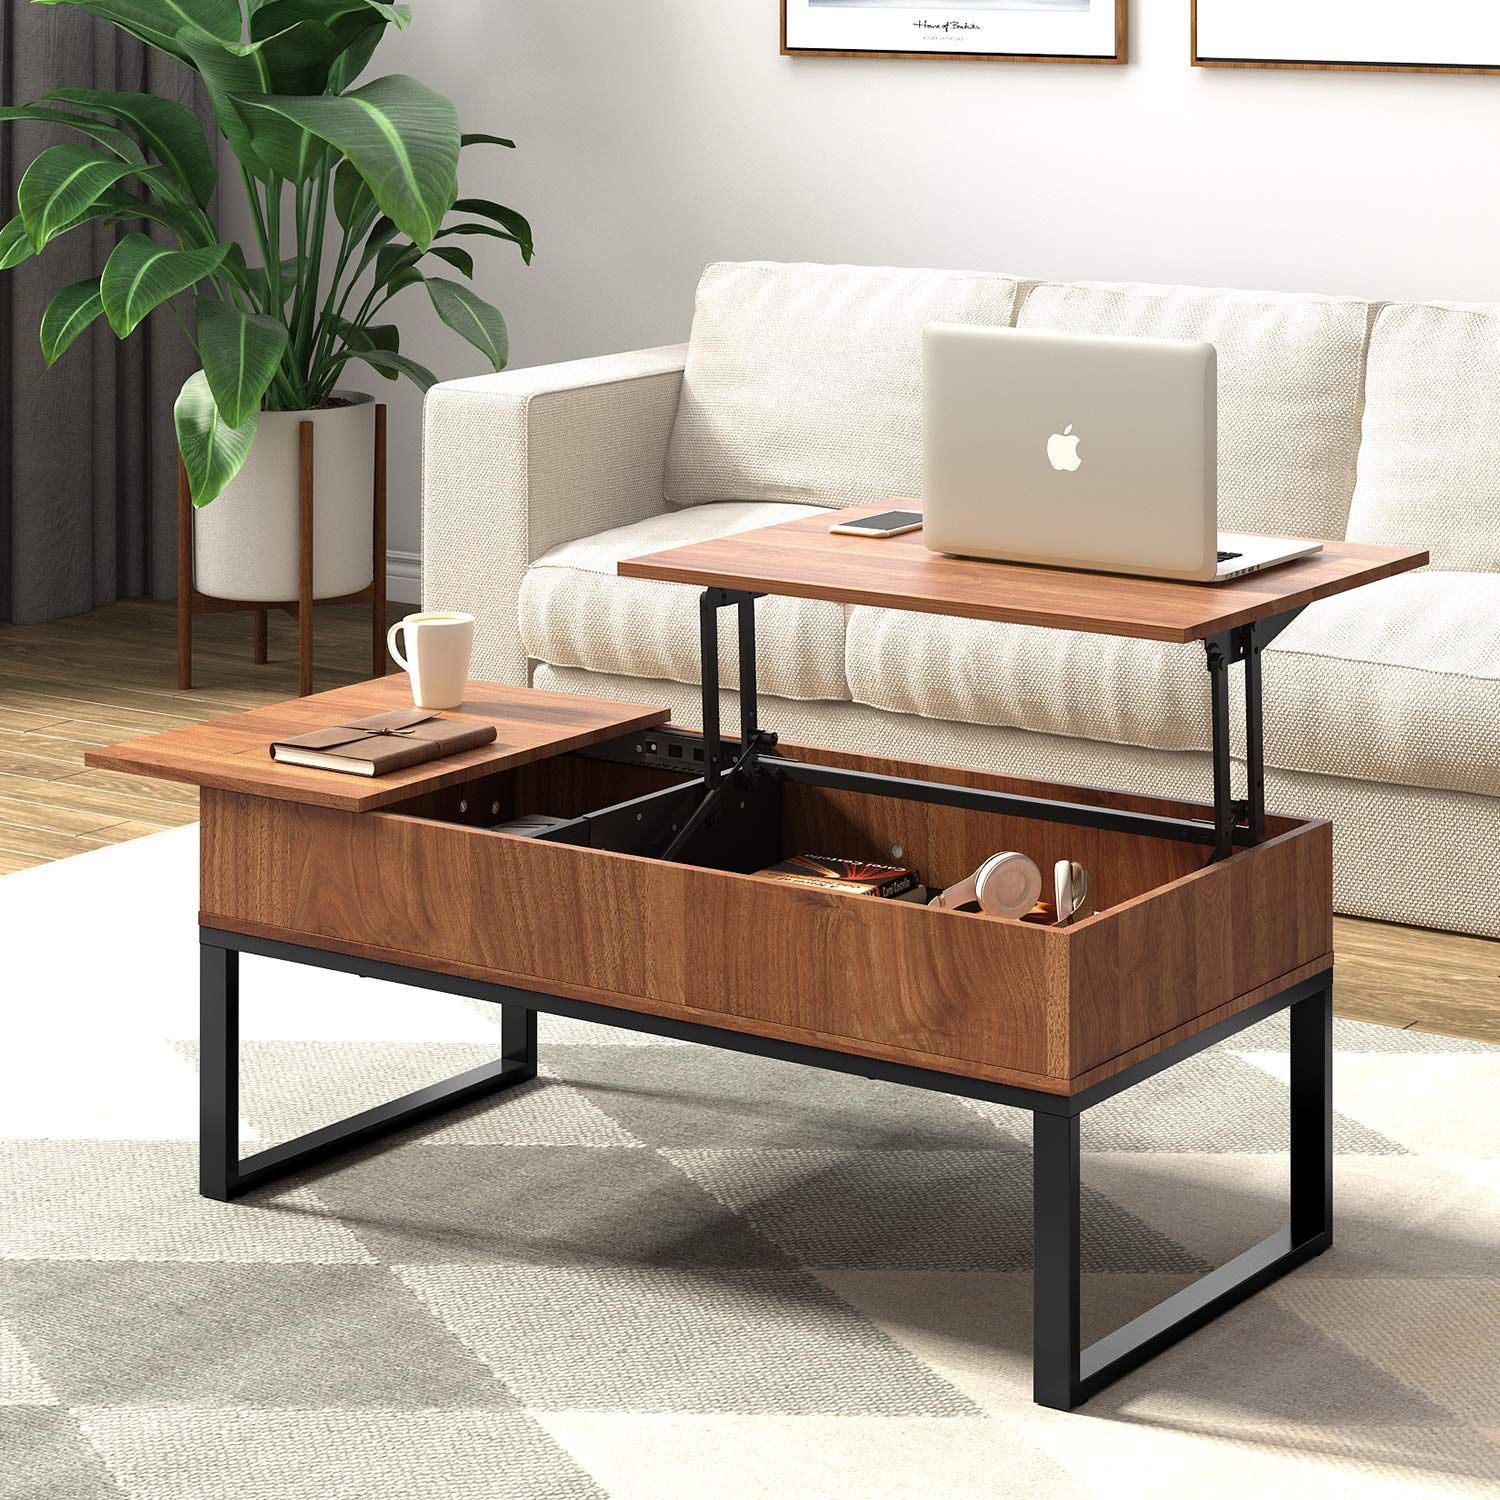 Wlive Wood Coffee Table With Adjustable Lift Top Table, Metal Frame Throughout Lift Top Coffee Tables With Hidden Storage Compartments (View 15 of 15)